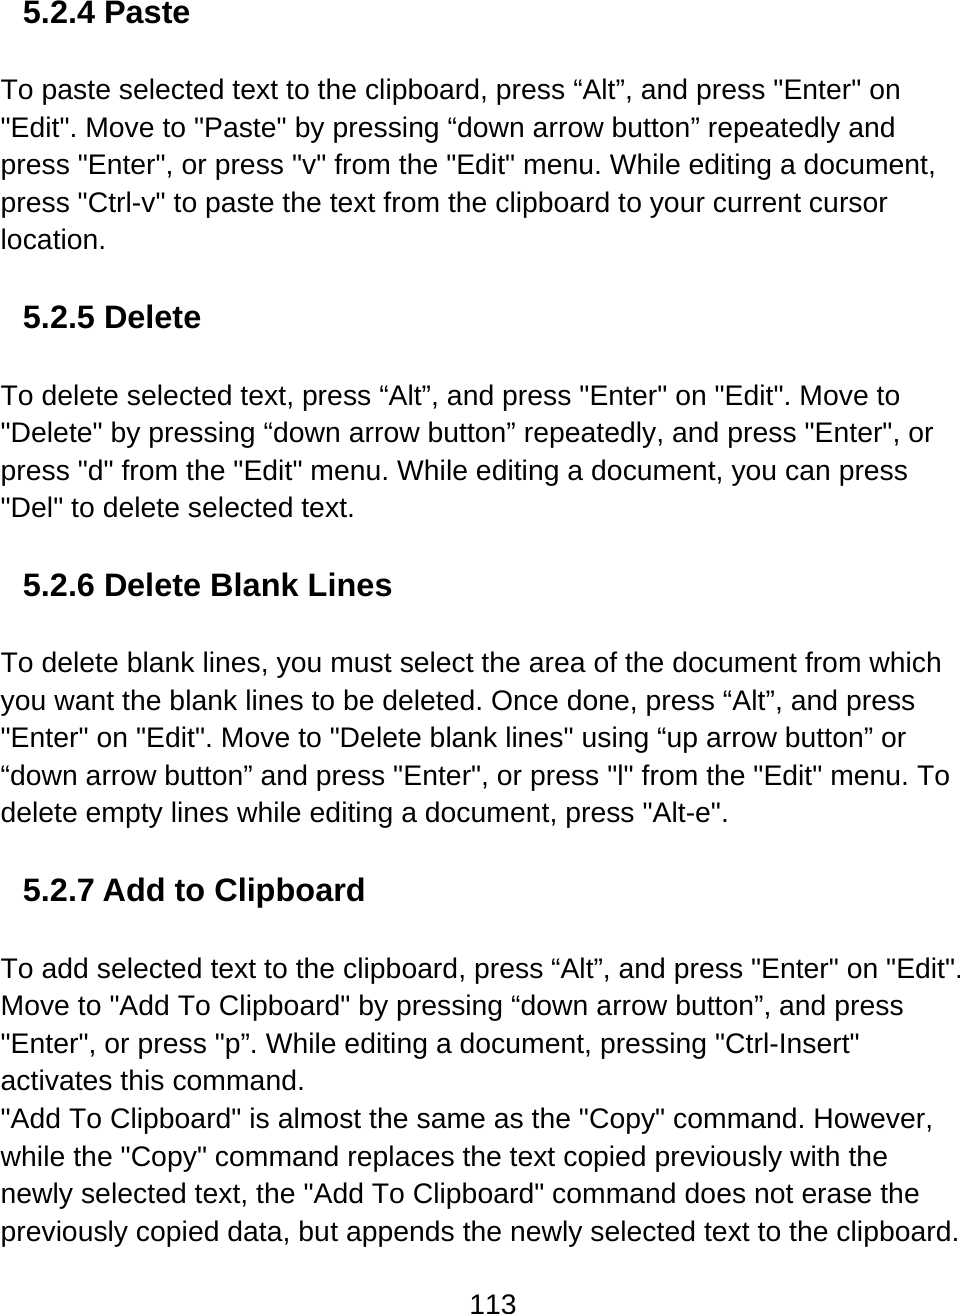 113  5.2.4 Paste  To paste selected text to the clipboard, press “Alt”, and press &quot;Enter&quot; on &quot;Edit&quot;. Move to &quot;Paste&quot; by pressing “down arrow button” repeatedly and press &quot;Enter&quot;, or press &quot;v&quot; from the &quot;Edit&quot; menu. While editing a document, press &quot;Ctrl-v&quot; to paste the text from the clipboard to your current cursor location.  5.2.5 Delete  To delete selected text, press “Alt”, and press &quot;Enter&quot; on &quot;Edit&quot;. Move to &quot;Delete&quot; by pressing “down arrow button” repeatedly, and press &quot;Enter&quot;, or press &quot;d&quot; from the &quot;Edit&quot; menu. While editing a document, you can press &quot;Del&quot; to delete selected text.   5.2.6 Delete Blank Lines  To delete blank lines, you must select the area of the document from which you want the blank lines to be deleted. Once done, press “Alt”, and press &quot;Enter&quot; on &quot;Edit&quot;. Move to &quot;Delete blank lines&quot; using “up arrow button” or “down arrow button” and press &quot;Enter&quot;, or press &quot;l&quot; from the &quot;Edit&quot; menu. To delete empty lines while editing a document, press &quot;Alt-e&quot;.   5.2.7 Add to Clipboard  To add selected text to the clipboard, press “Alt”, and press &quot;Enter&quot; on &quot;Edit&quot;. Move to &quot;Add To Clipboard&quot; by pressing “down arrow button”, and press &quot;Enter&quot;, or press &quot;p”. While editing a document, pressing &quot;Ctrl-Insert&quot; activates this command. &quot;Add To Clipboard&quot; is almost the same as the &quot;Copy&quot; command. However, while the &quot;Copy&quot; command replaces the text copied previously with the newly selected text, the &quot;Add To Clipboard&quot; command does not erase the previously copied data, but appends the newly selected text to the clipboard. 